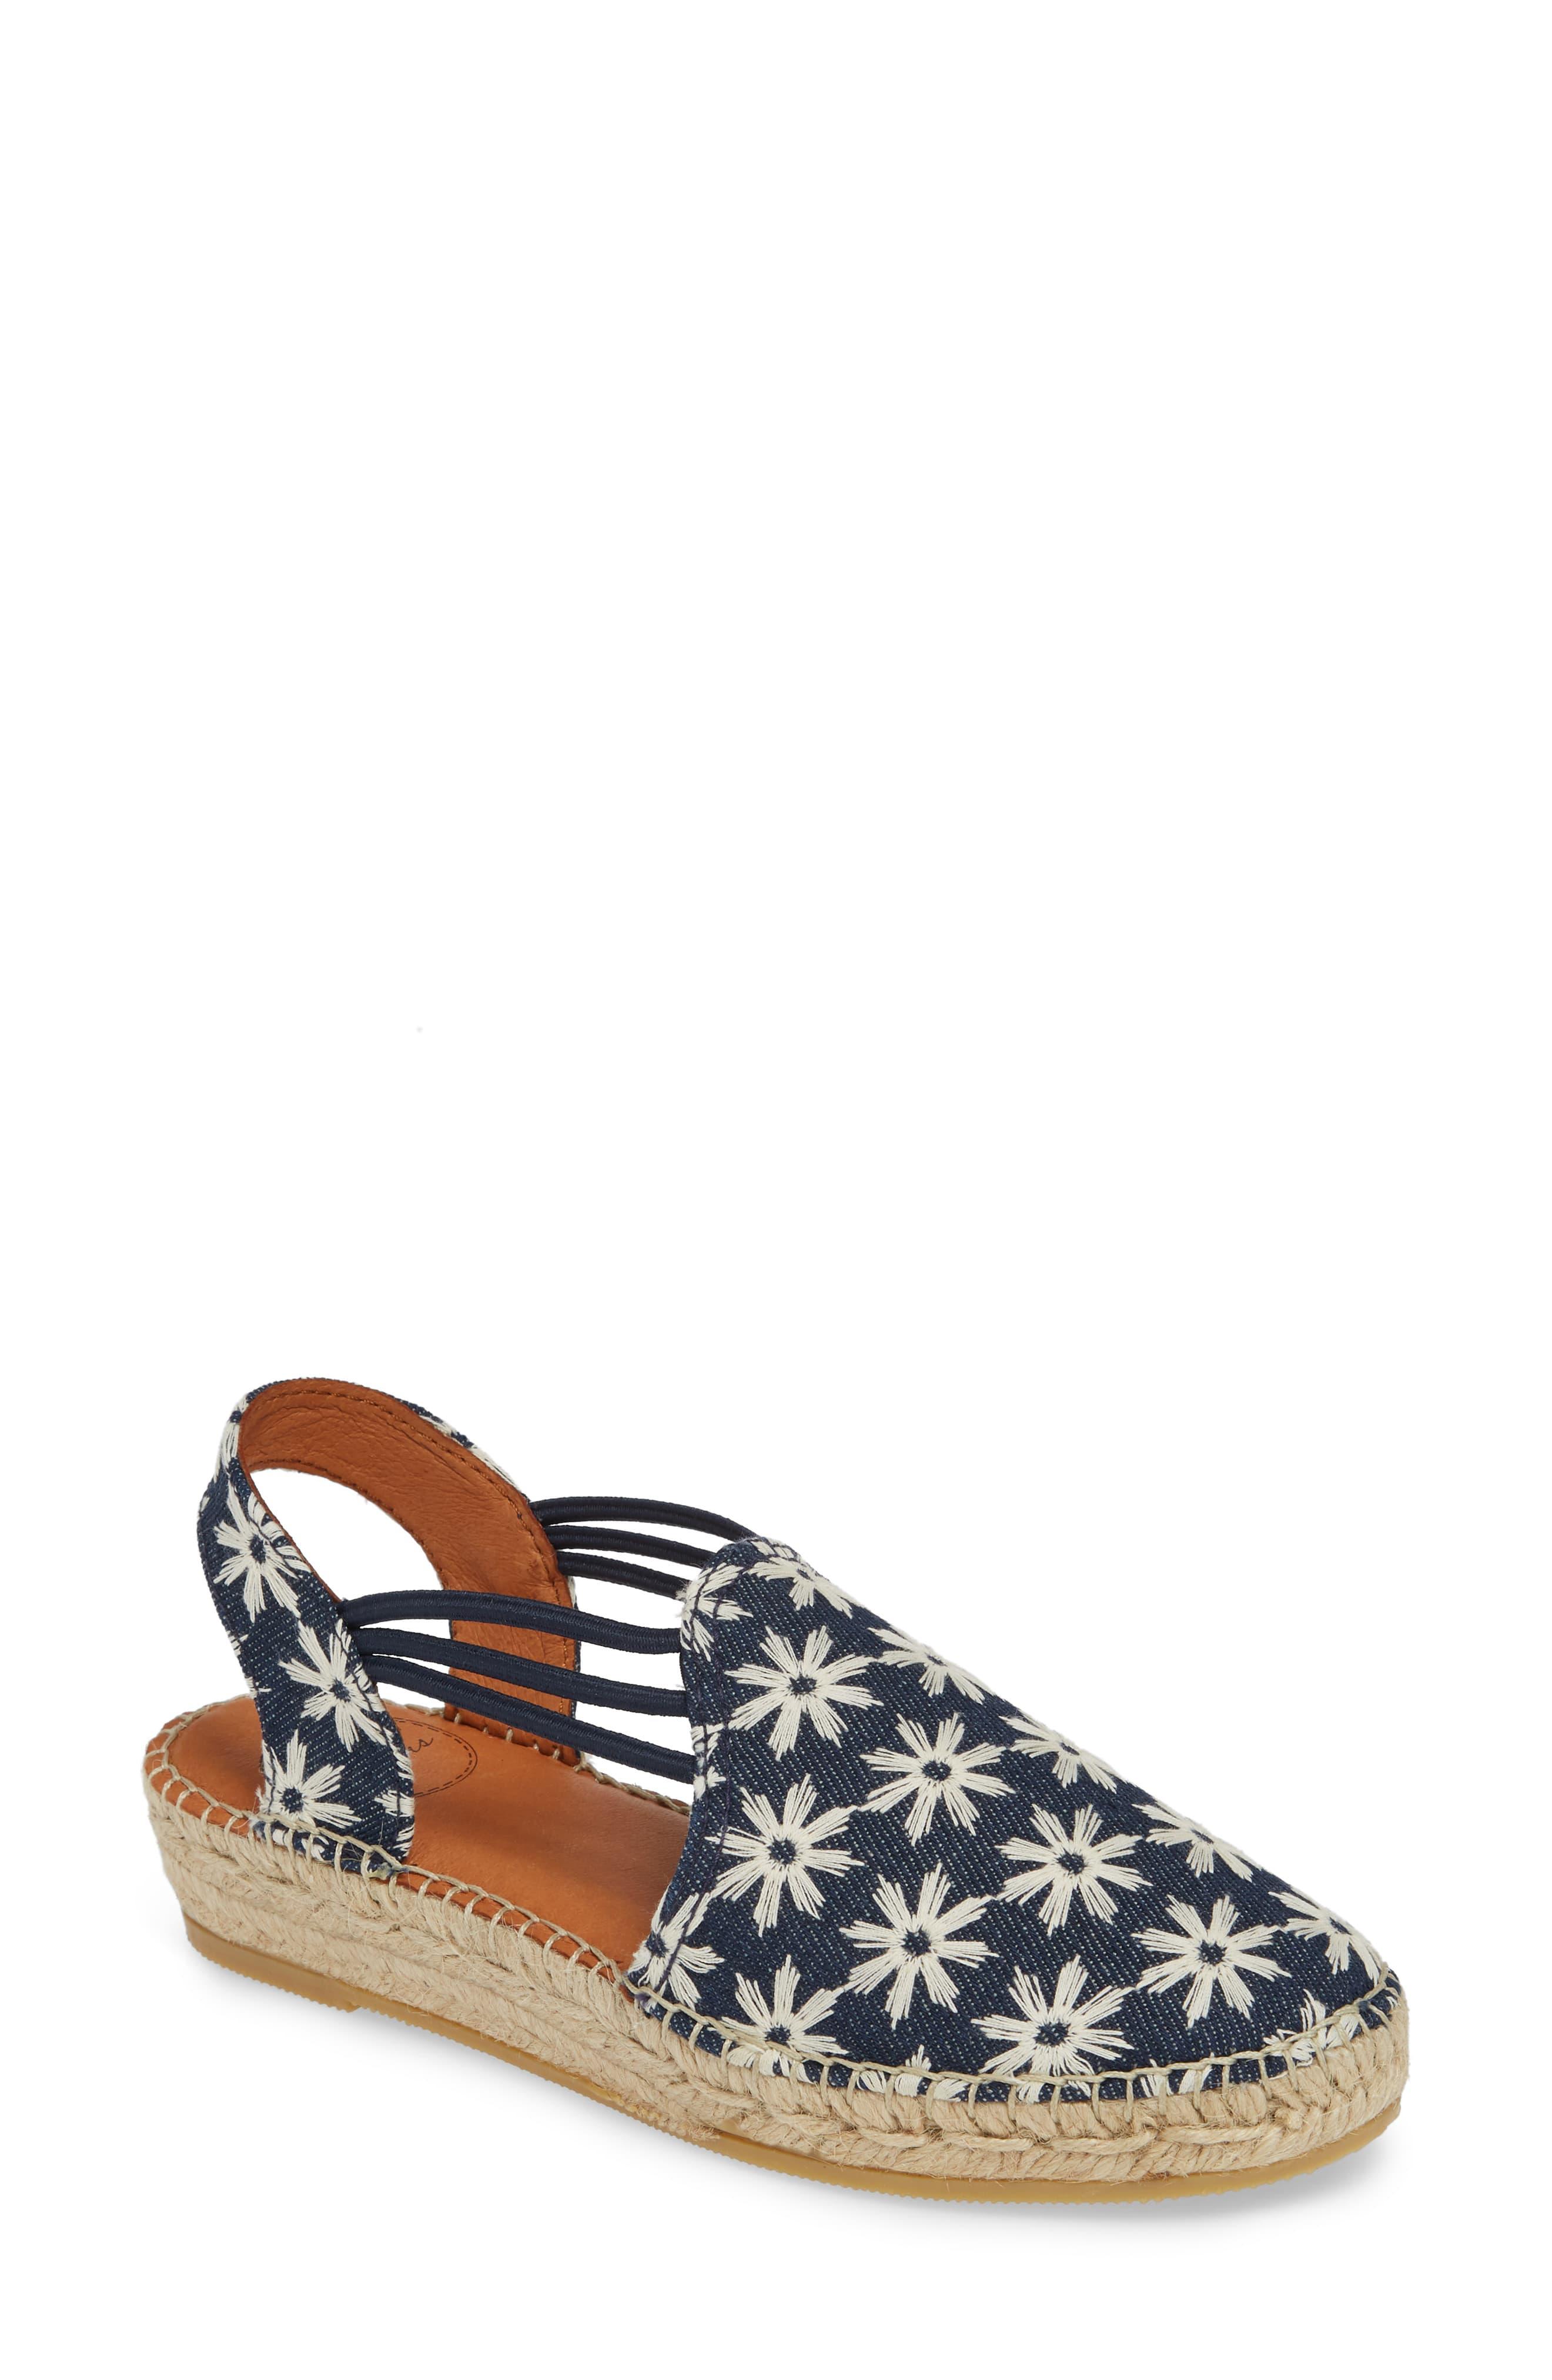 Toni Pons Noa Embroidered Espadrille Sandal in Blue - Lyst